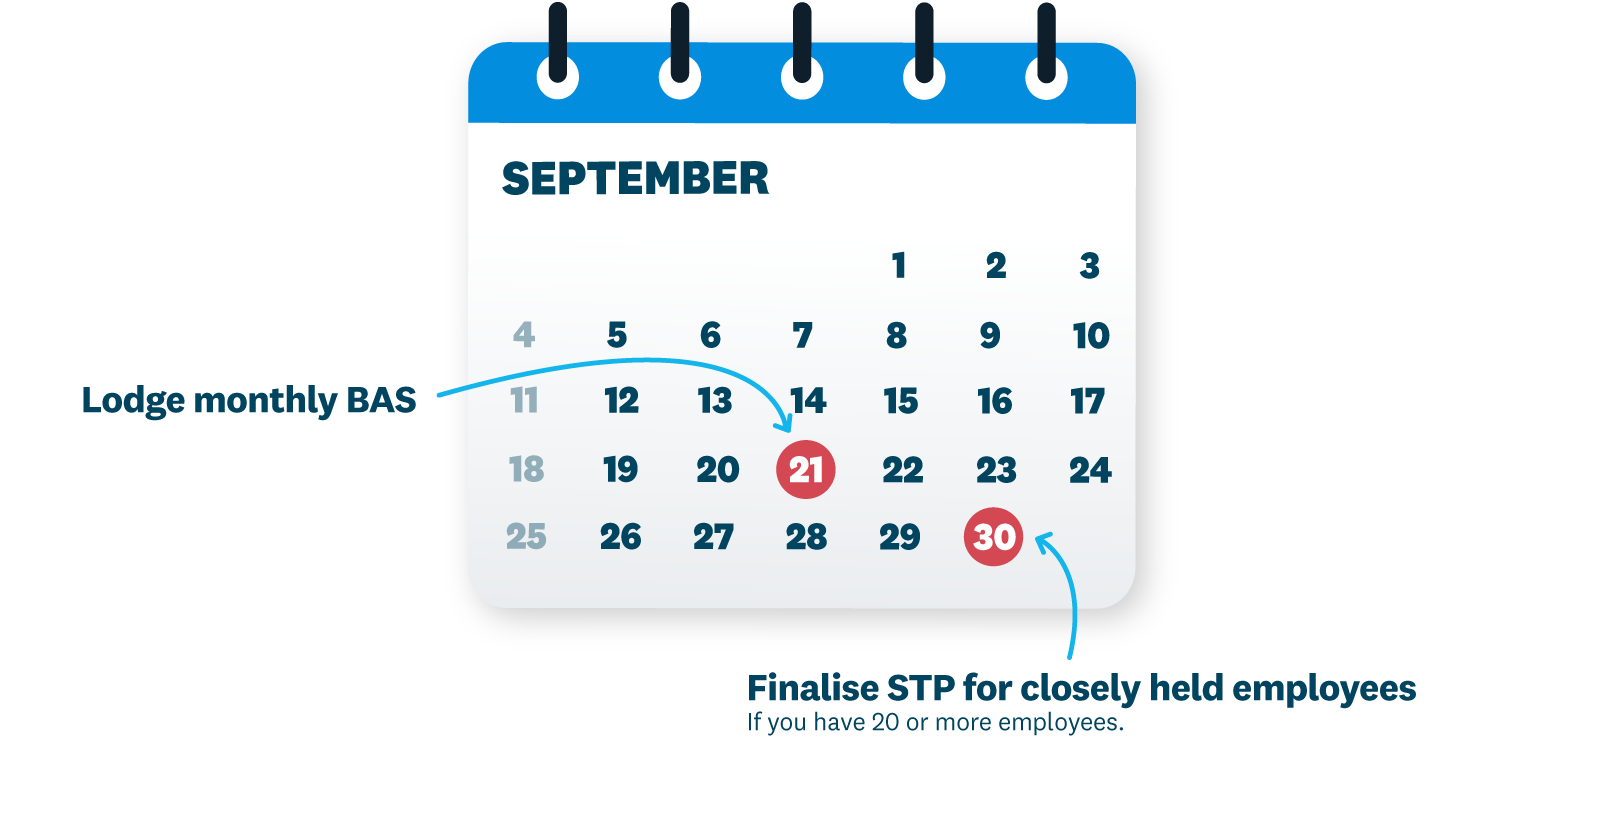 A calendar showing key dates in September. An overview is in the description below.